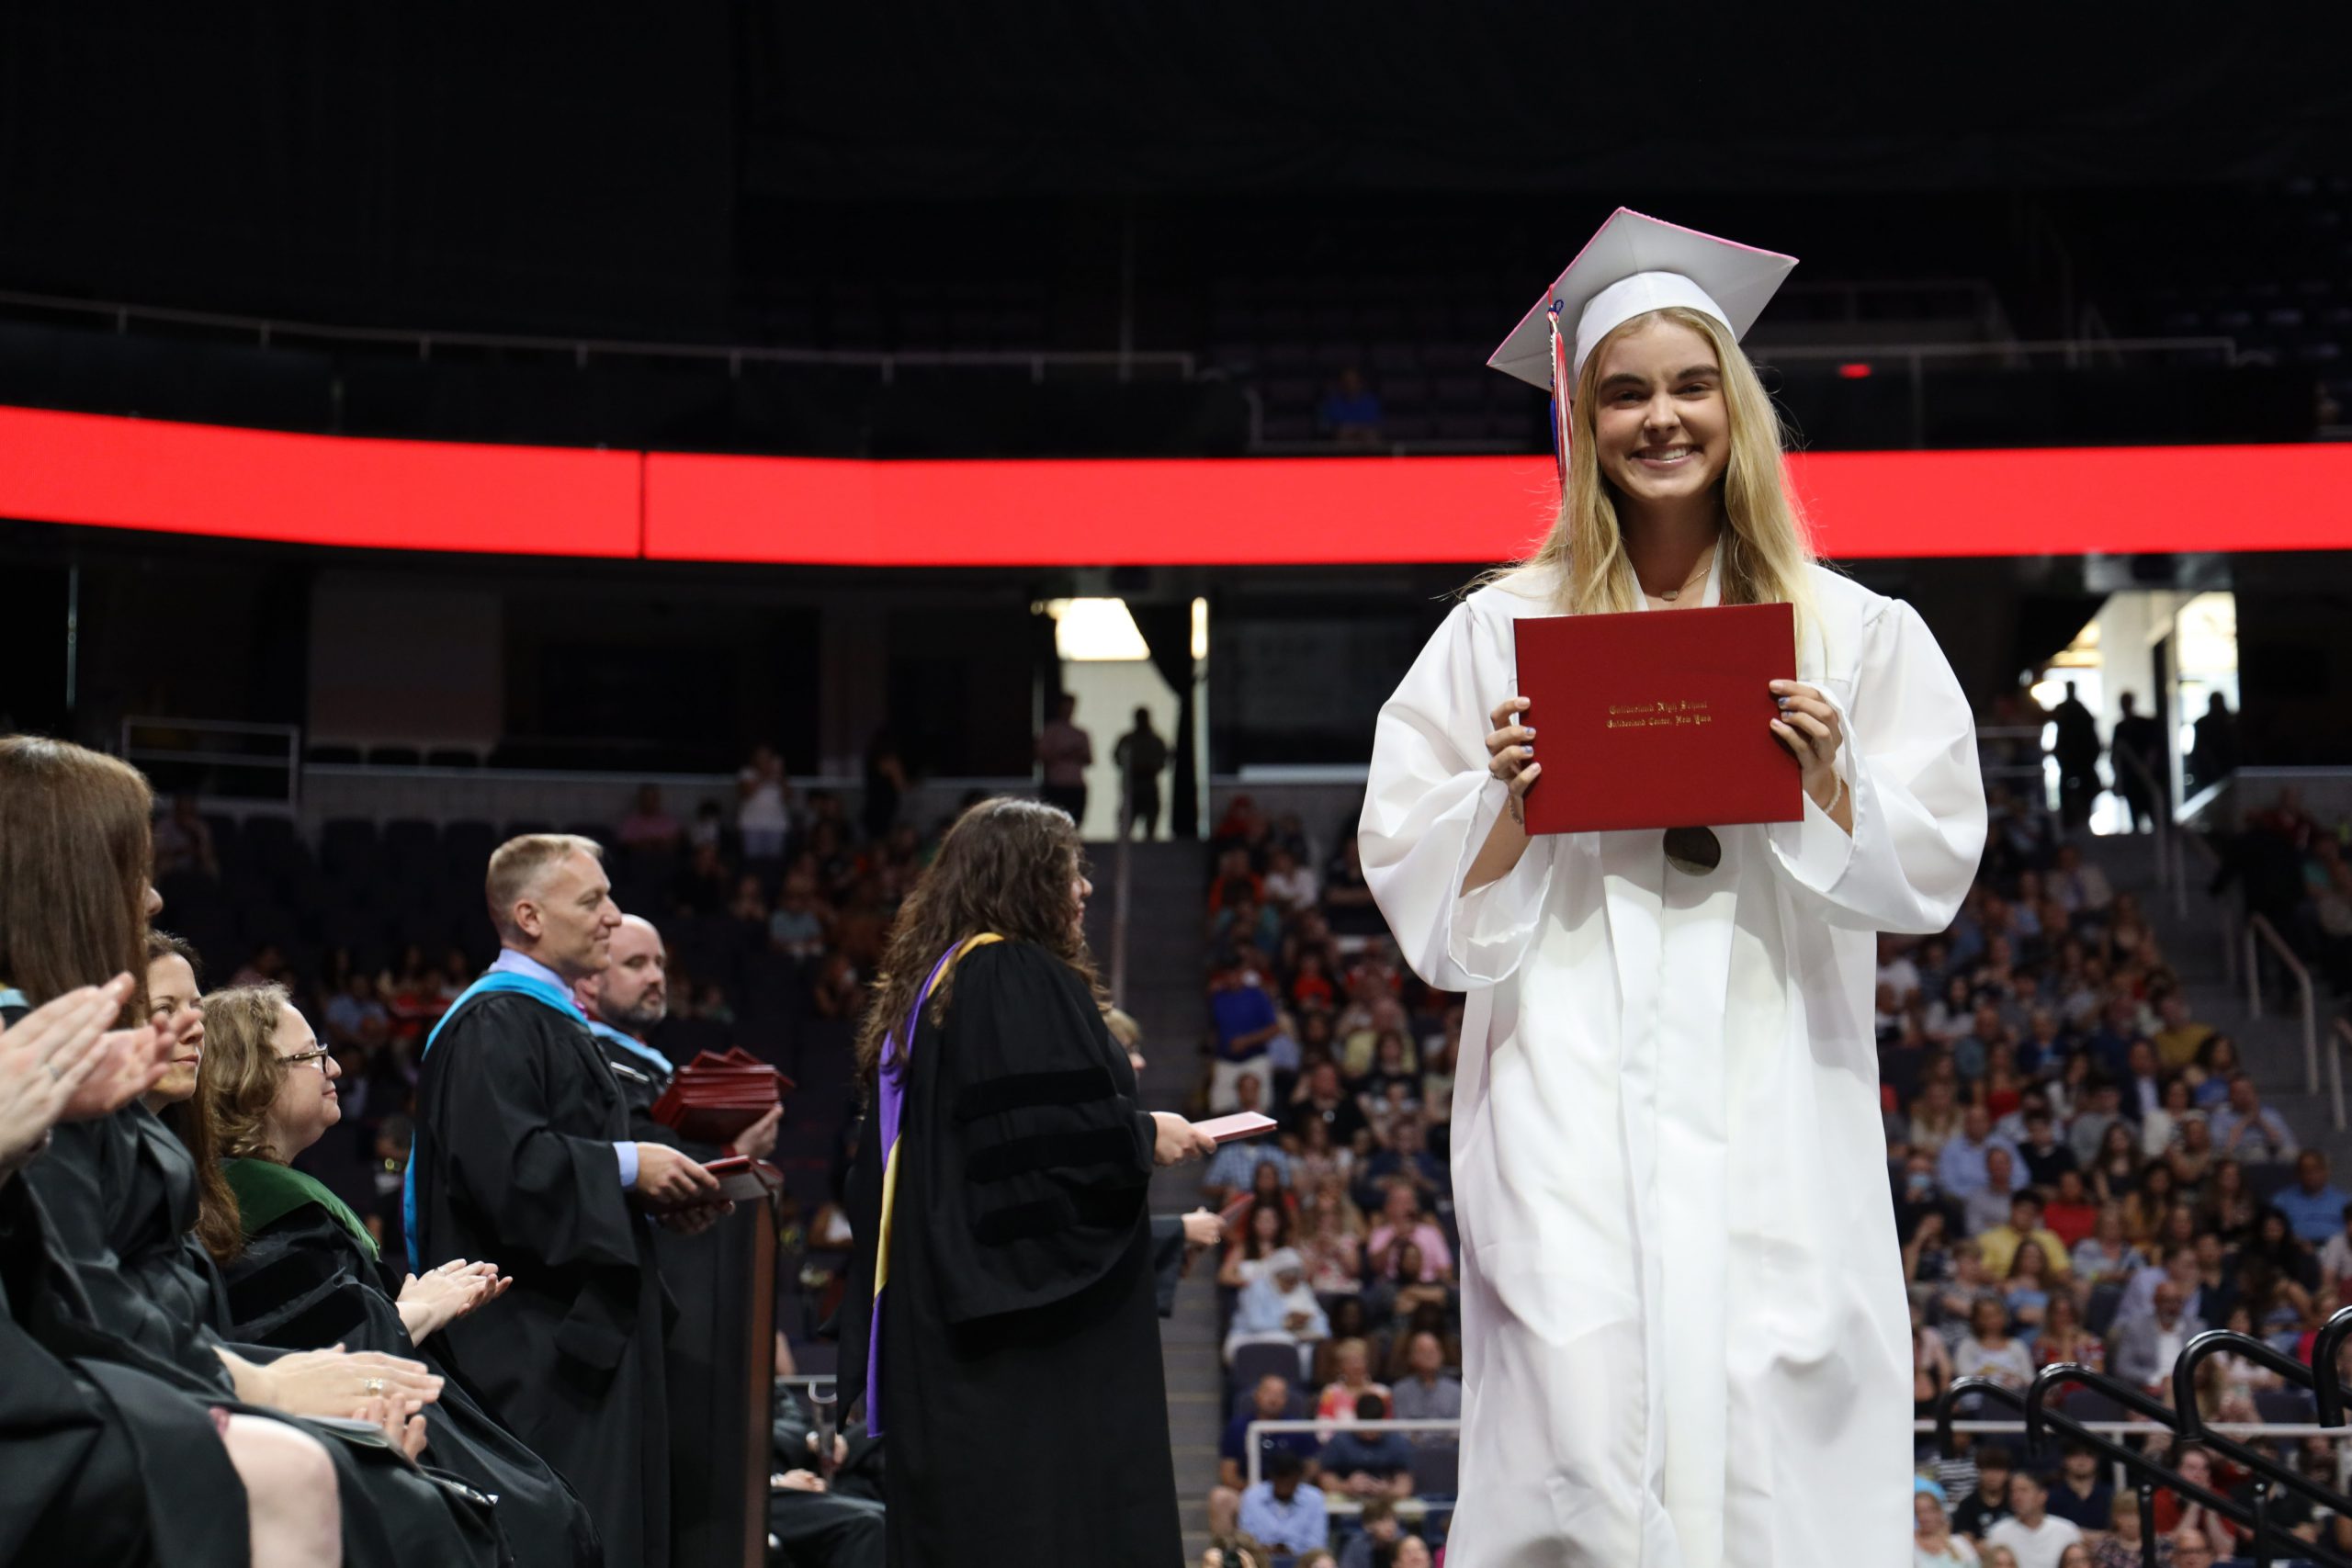 A student wearing a white cap and gown holds up a diploma and is smiling